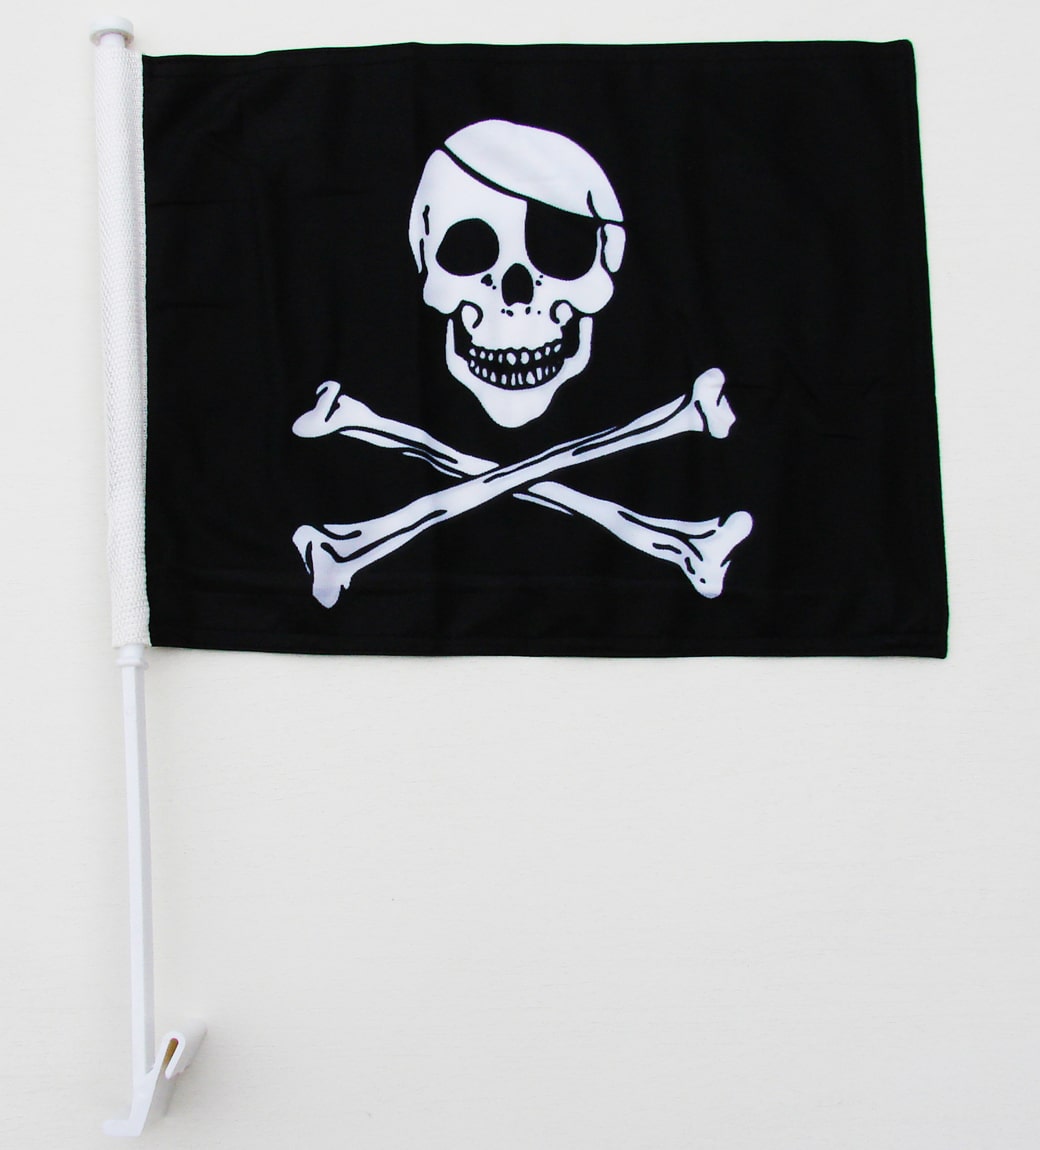 Pirate Car Flag - Pirate - Car Flags - Pirate Flags - Pirate Car  FlagsFlagpoles, Flags, Mounts, Lights, Motorcycle Accessories